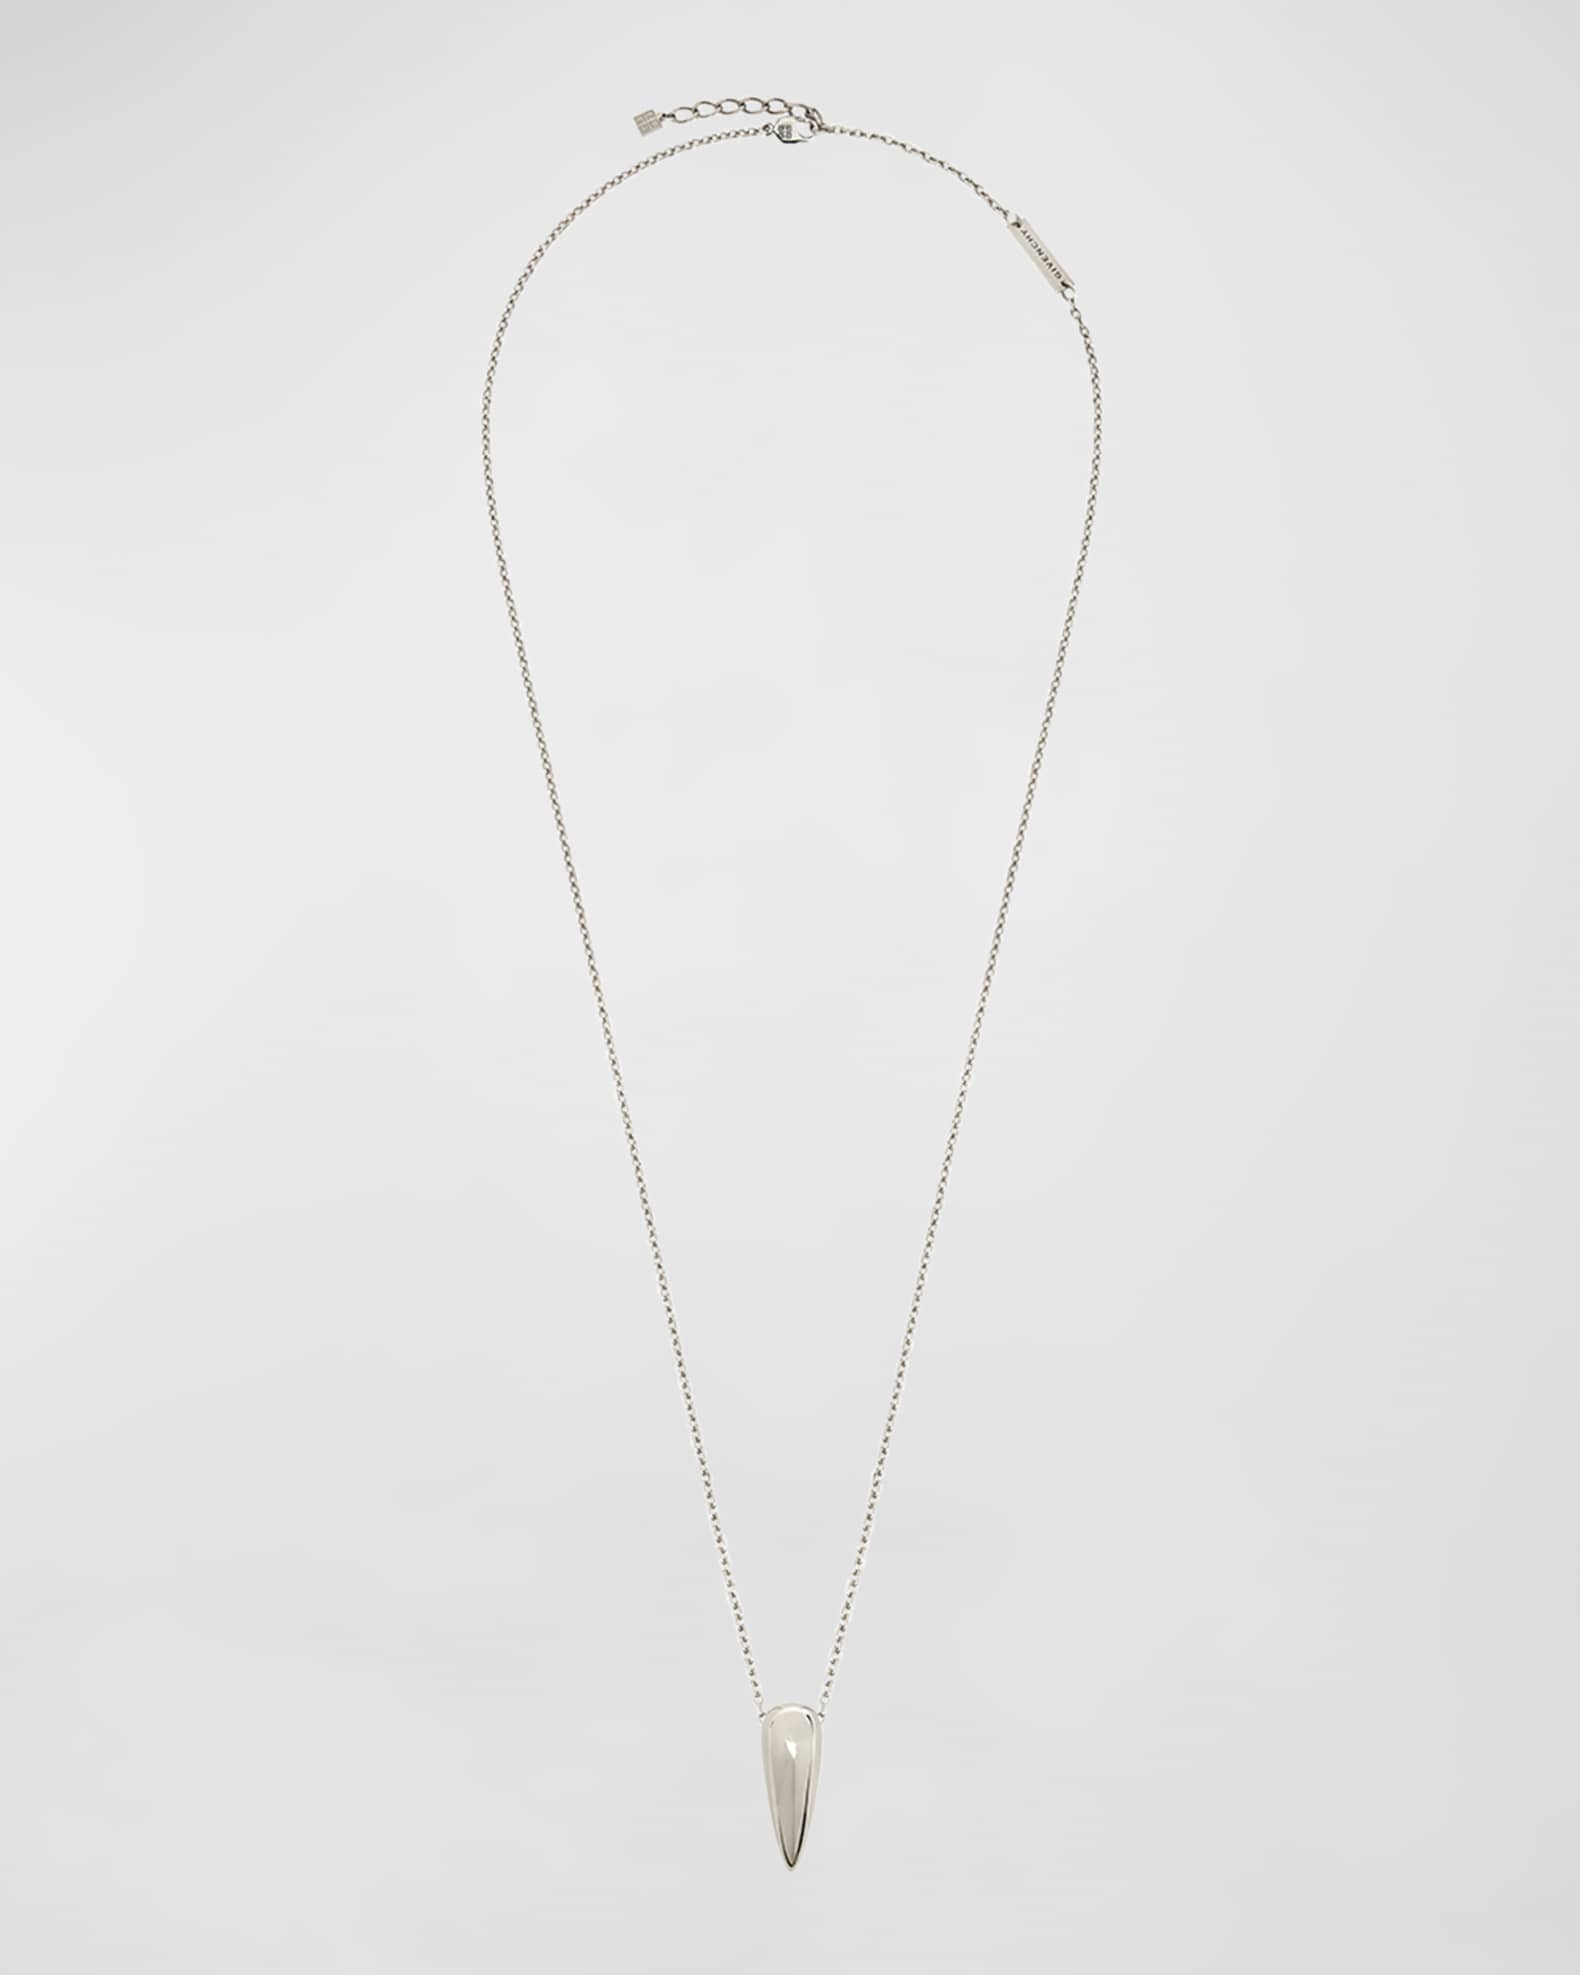 Givenchy Men's G Tears Silvery Pendant Necklace | Neiman Marcus